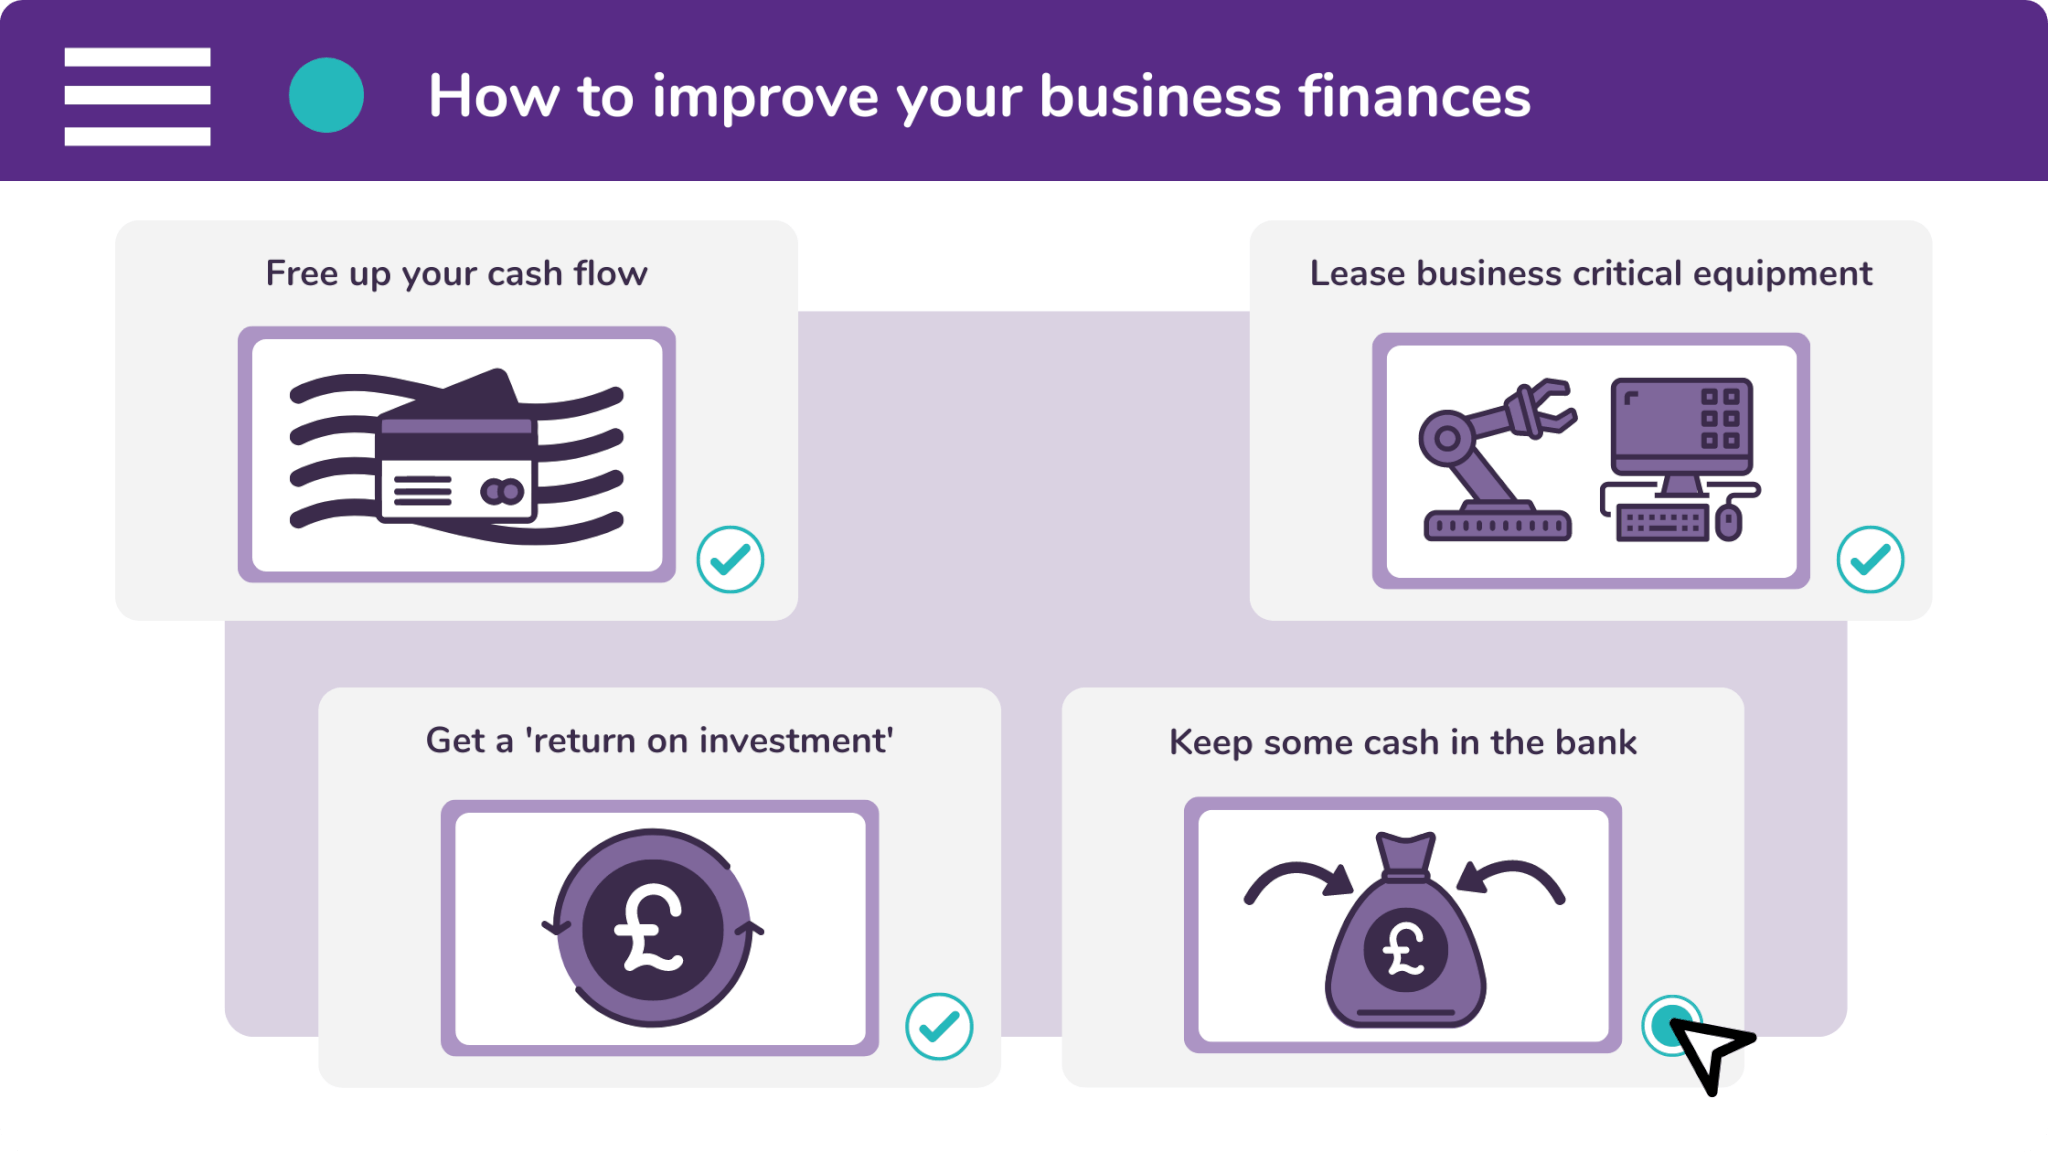 You can improve your business finances by following these four simple steps.